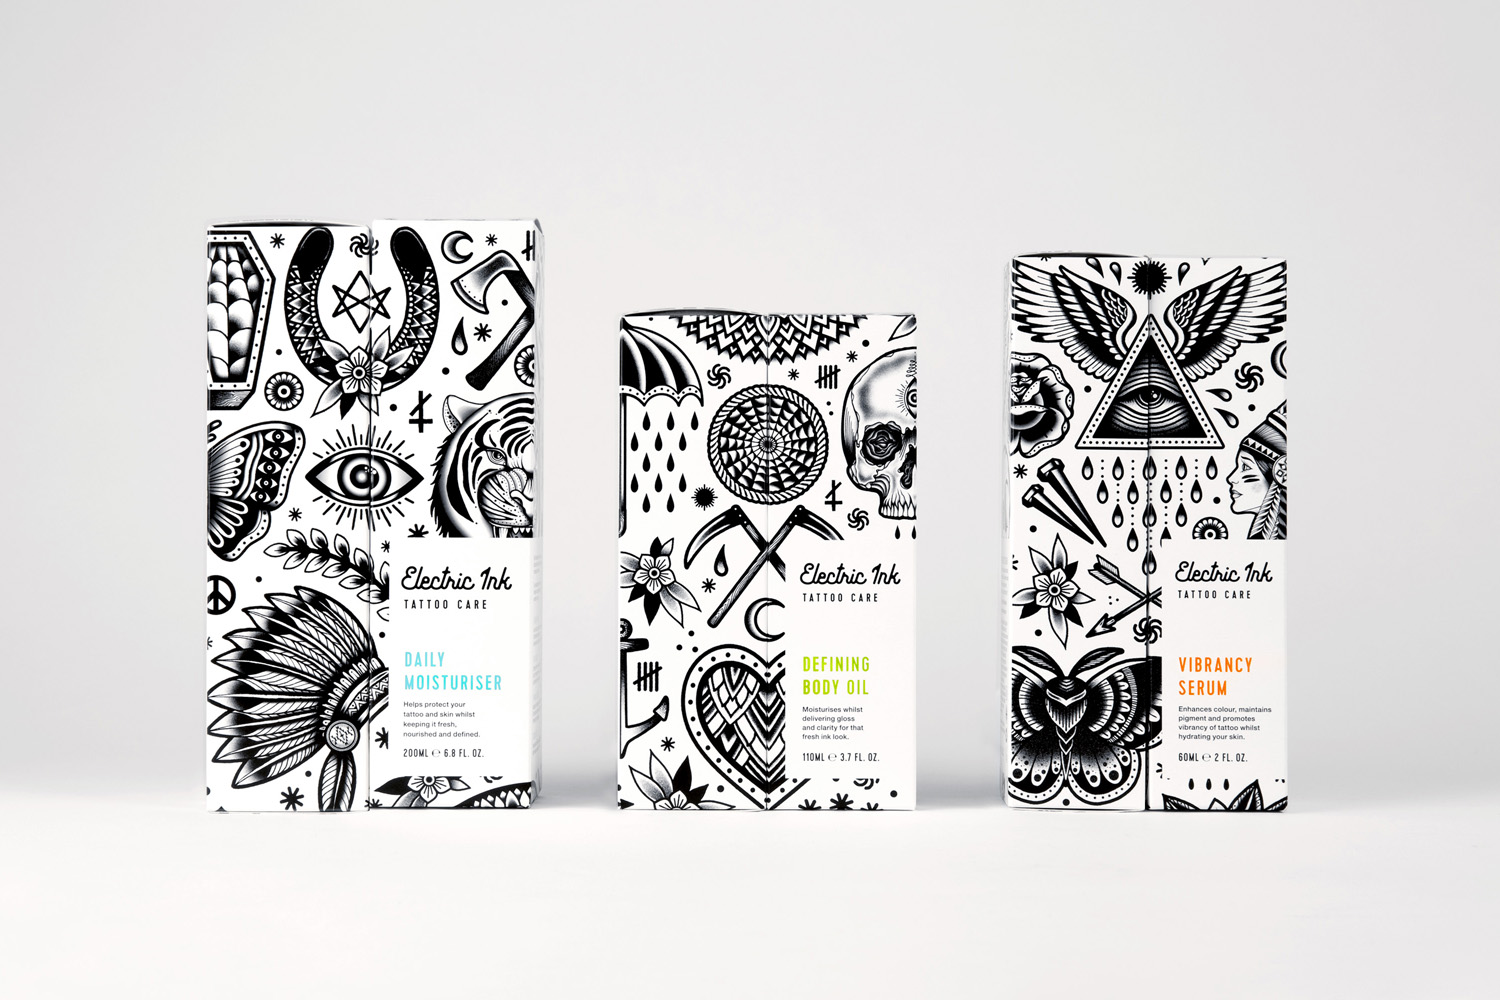 British Packaging Design – Electric Ink by Robot Food, Leeds